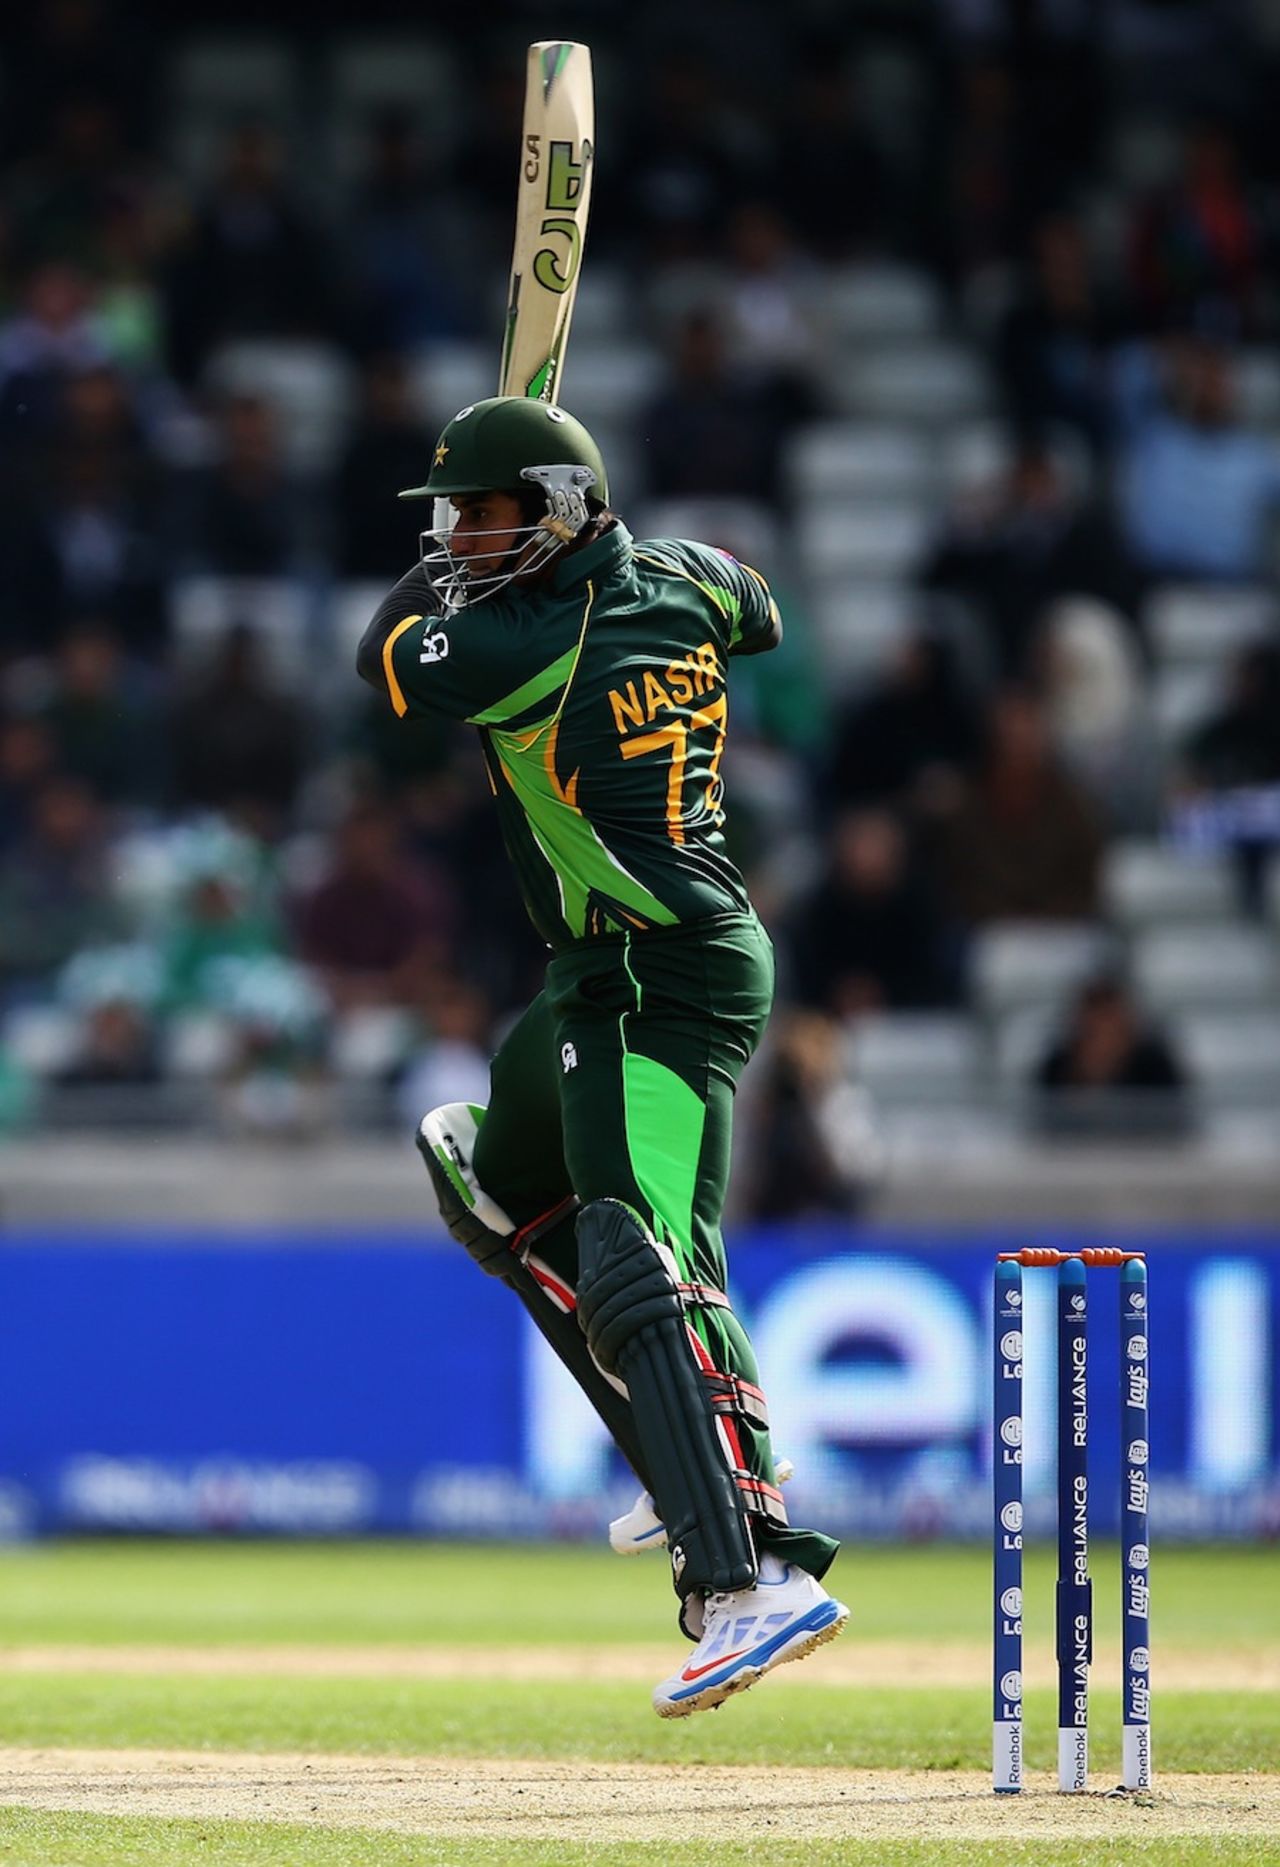 Nasir Jamshed hops on his toes to cut the ball, Pakistan v South Africa, Champions Trophy, Group B, Edgbaston, June 10, 2013